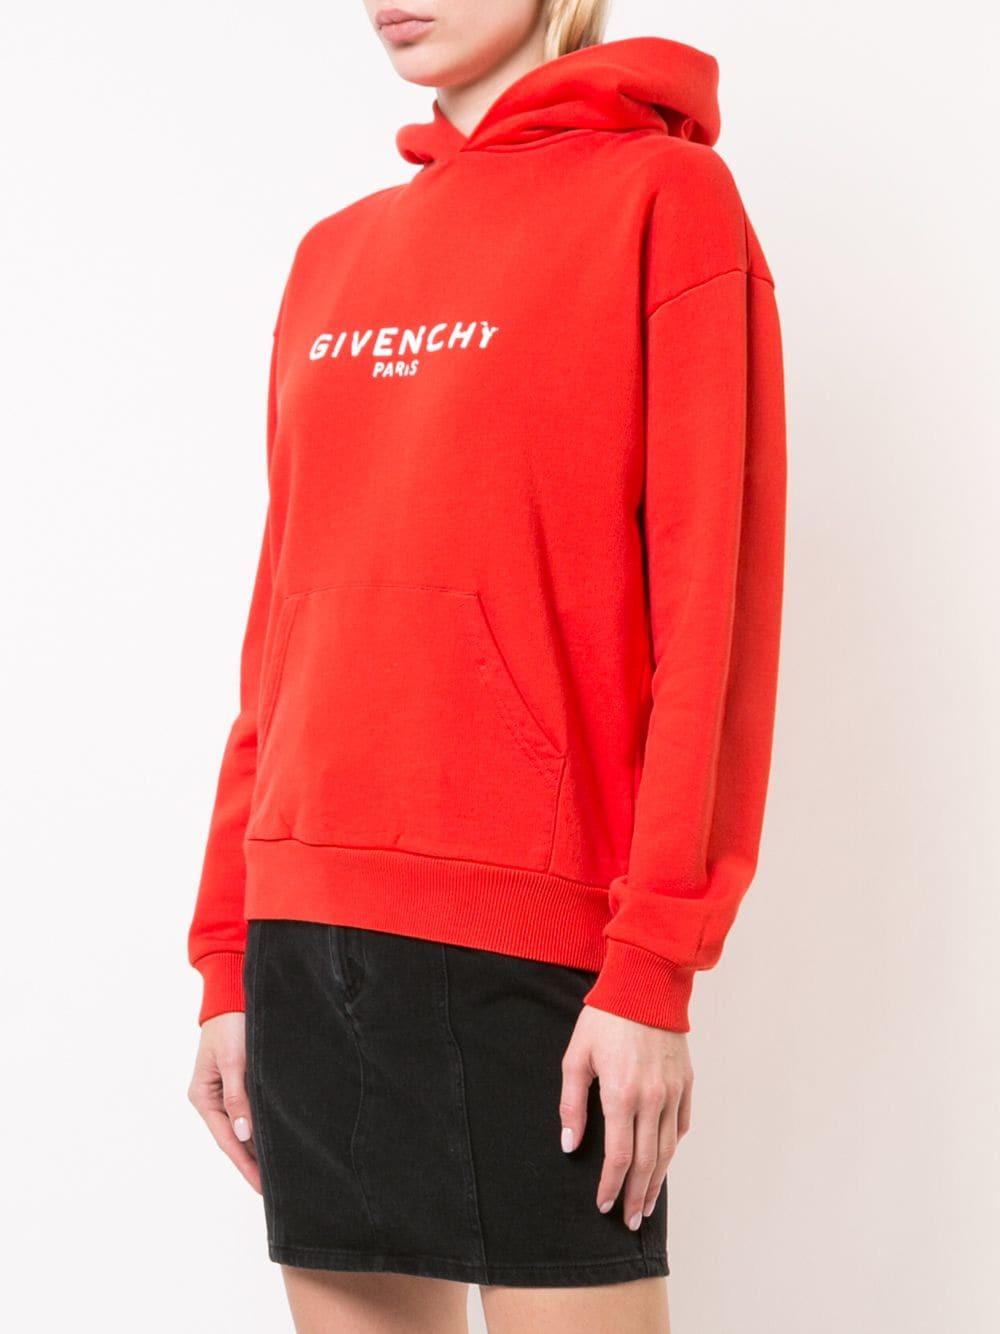 Givenchy Paris Vintage Hoodie in Red for Men - Lyst